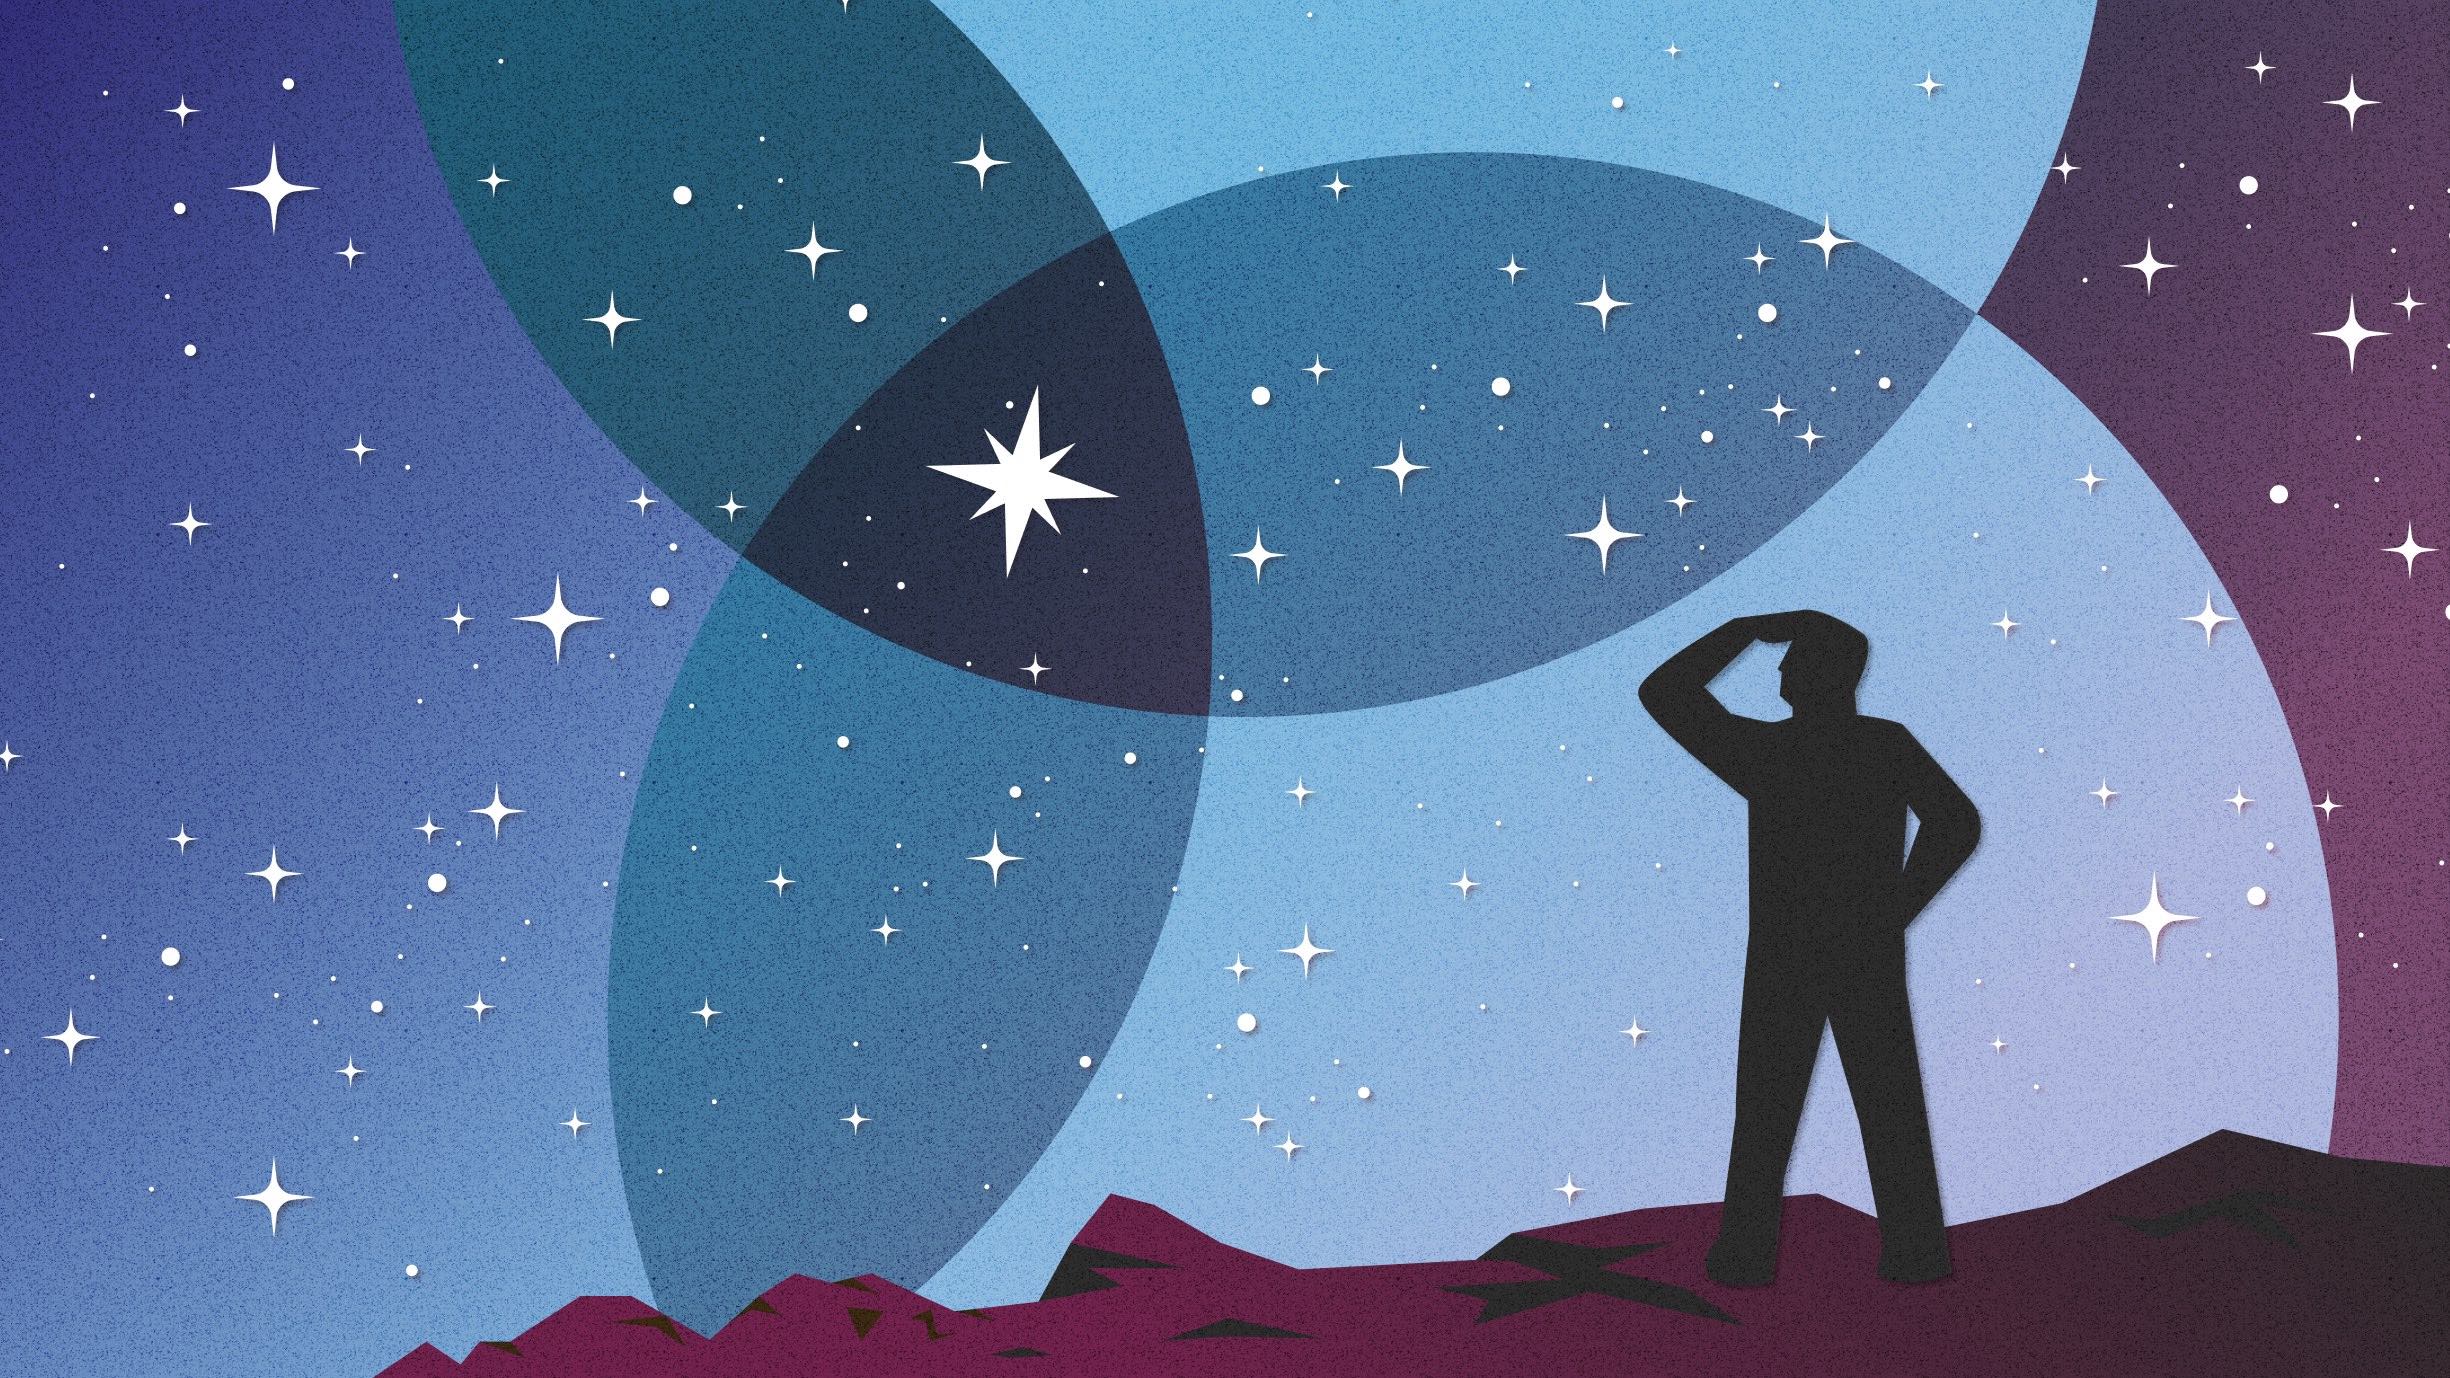 A stargazer stands on the crest of a hill and peers at the night sky, where a bright star shines at the center of intersecting circles of light in hues of blue and purple.